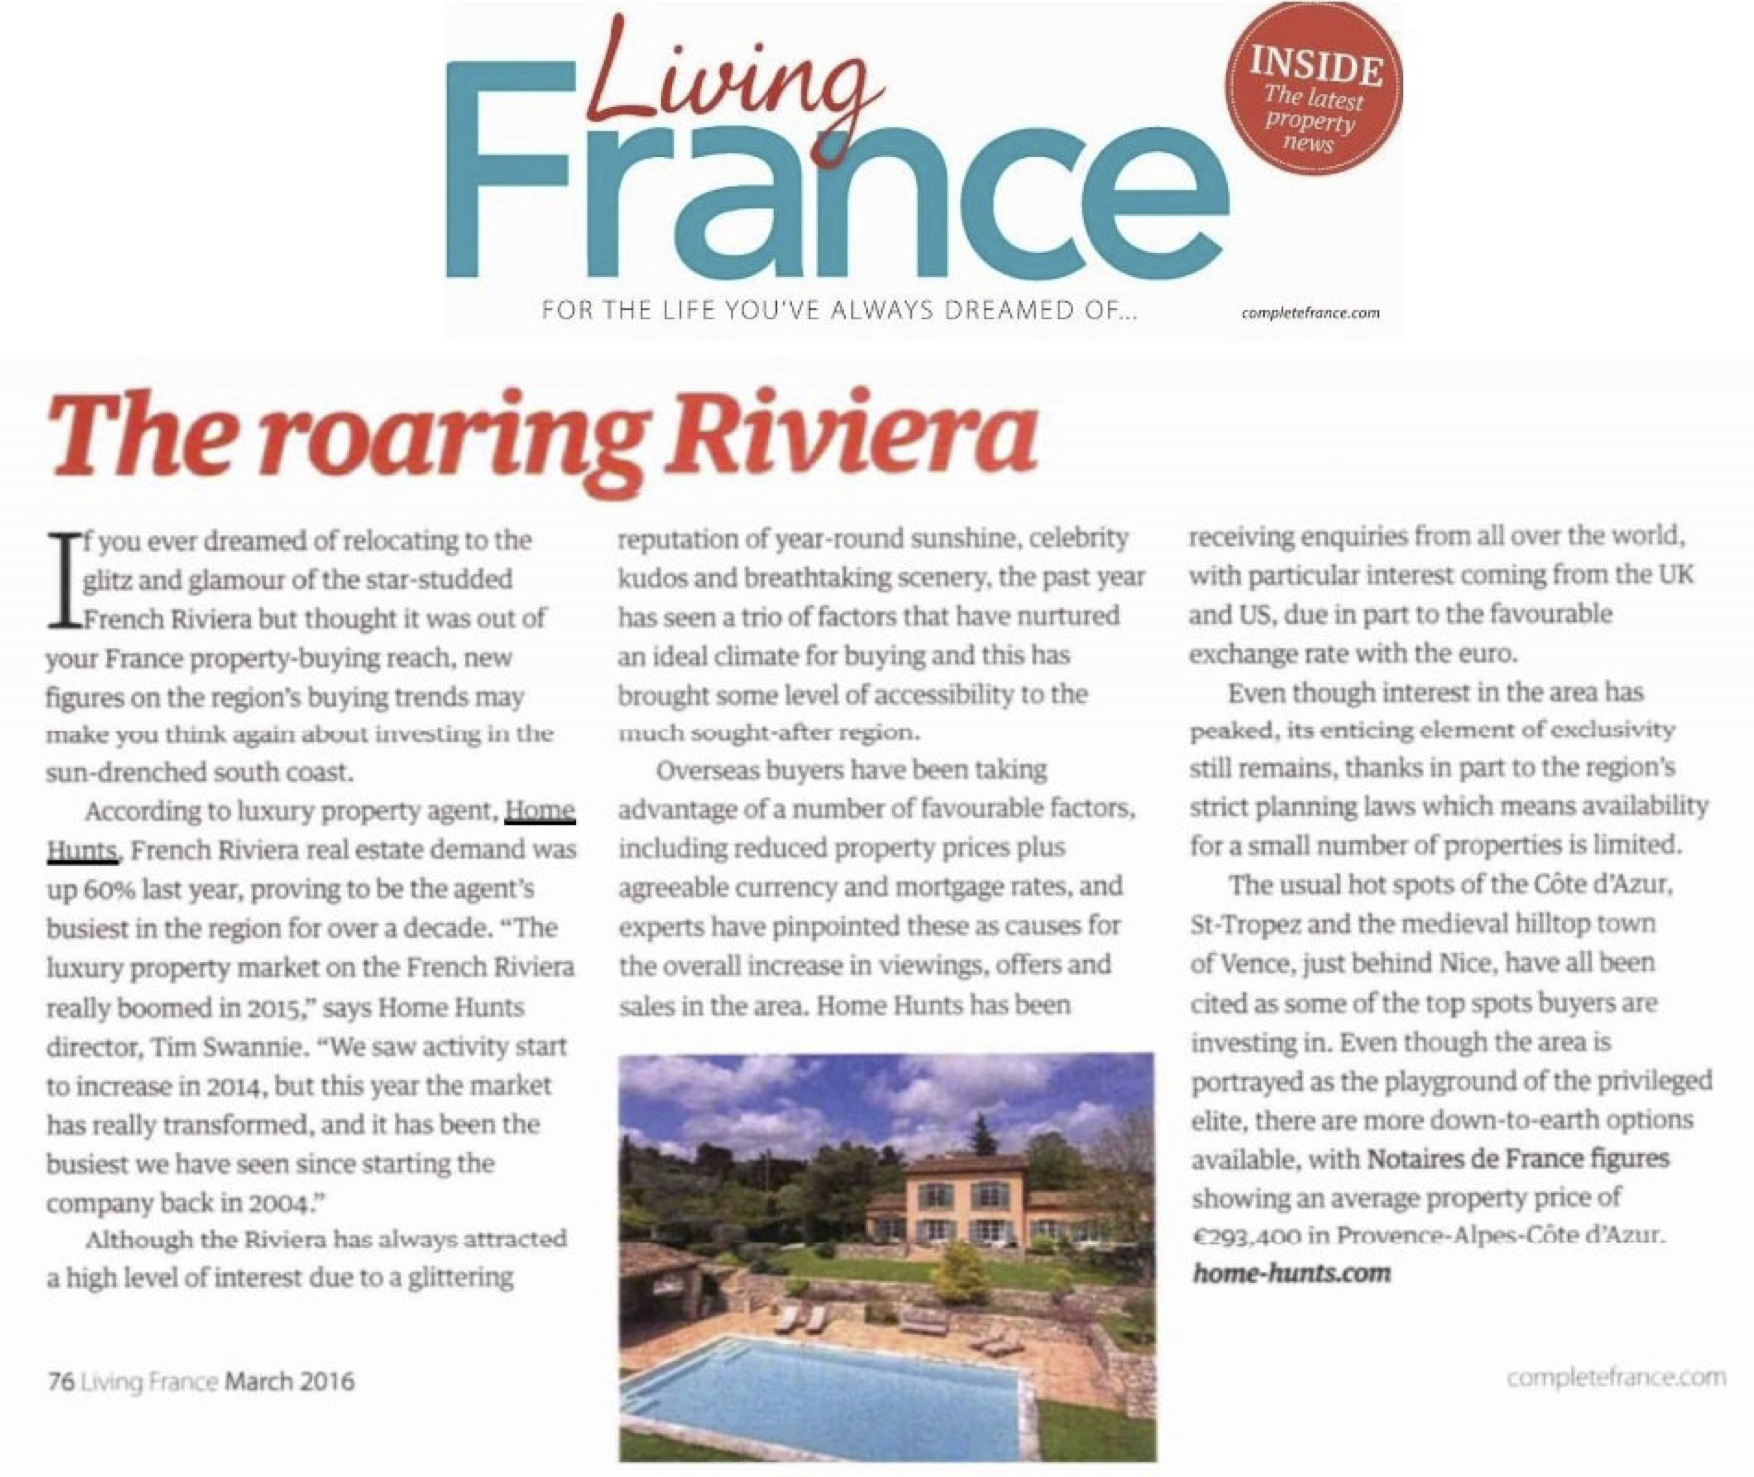 Living France Magazine – The Roaring Riviera – French Riviera Property